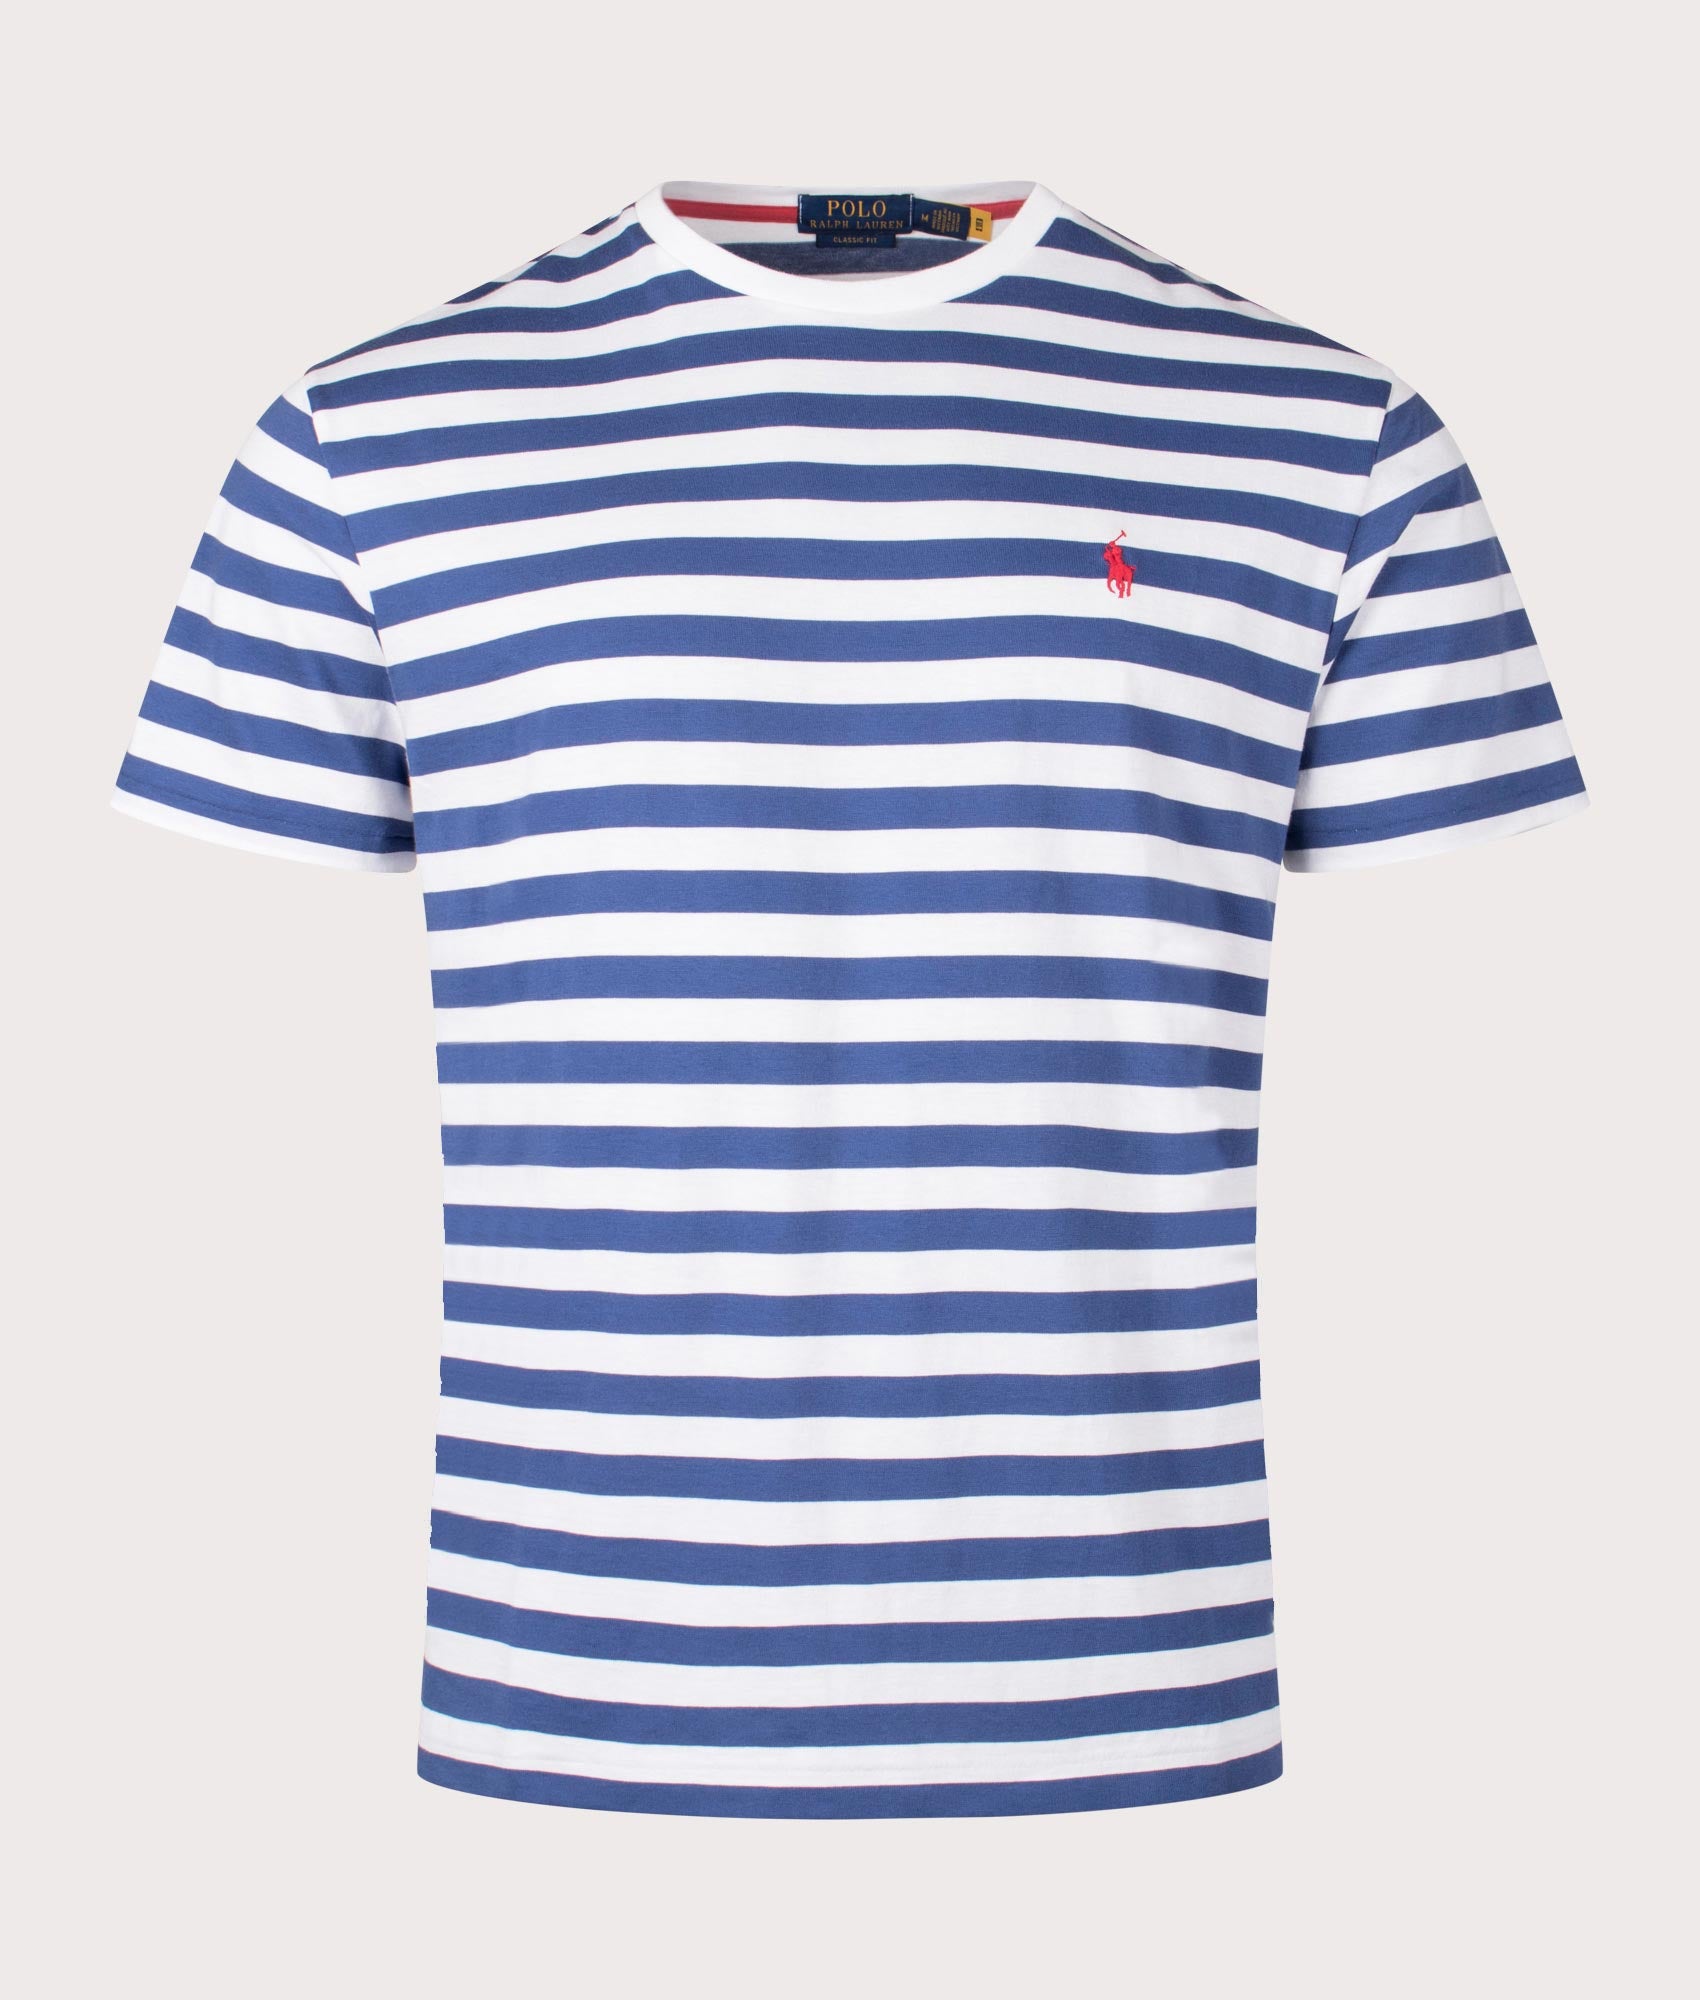 Polo Ralph Lauren Mens Classic Fit Striped Jersey T-Shirt - Colour: 001 Old Royal/White - Size: Larg